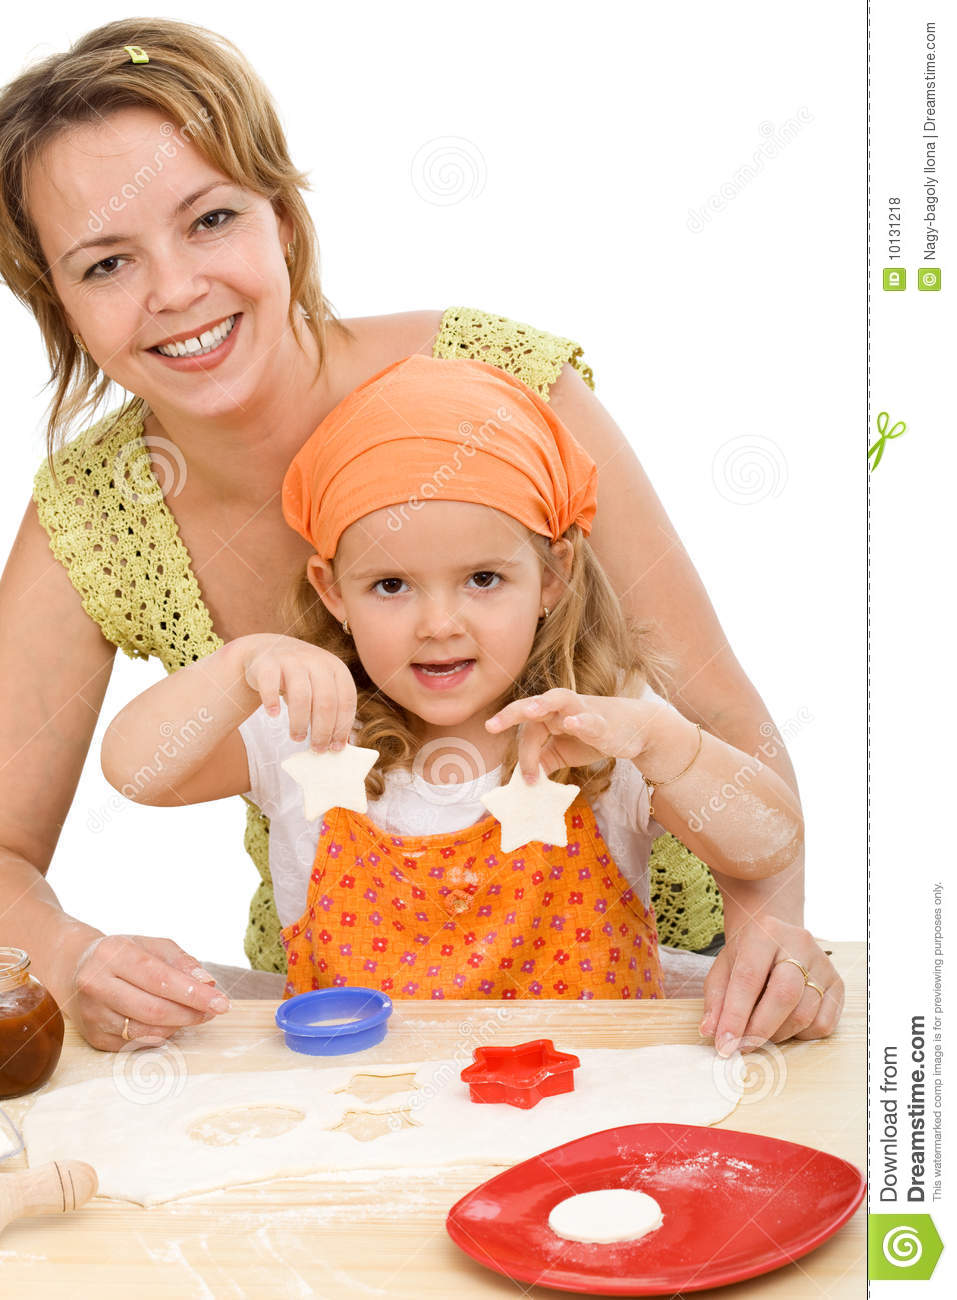 Woman And Little Girl Making Cookies Royalty Free Stock Photos   Image